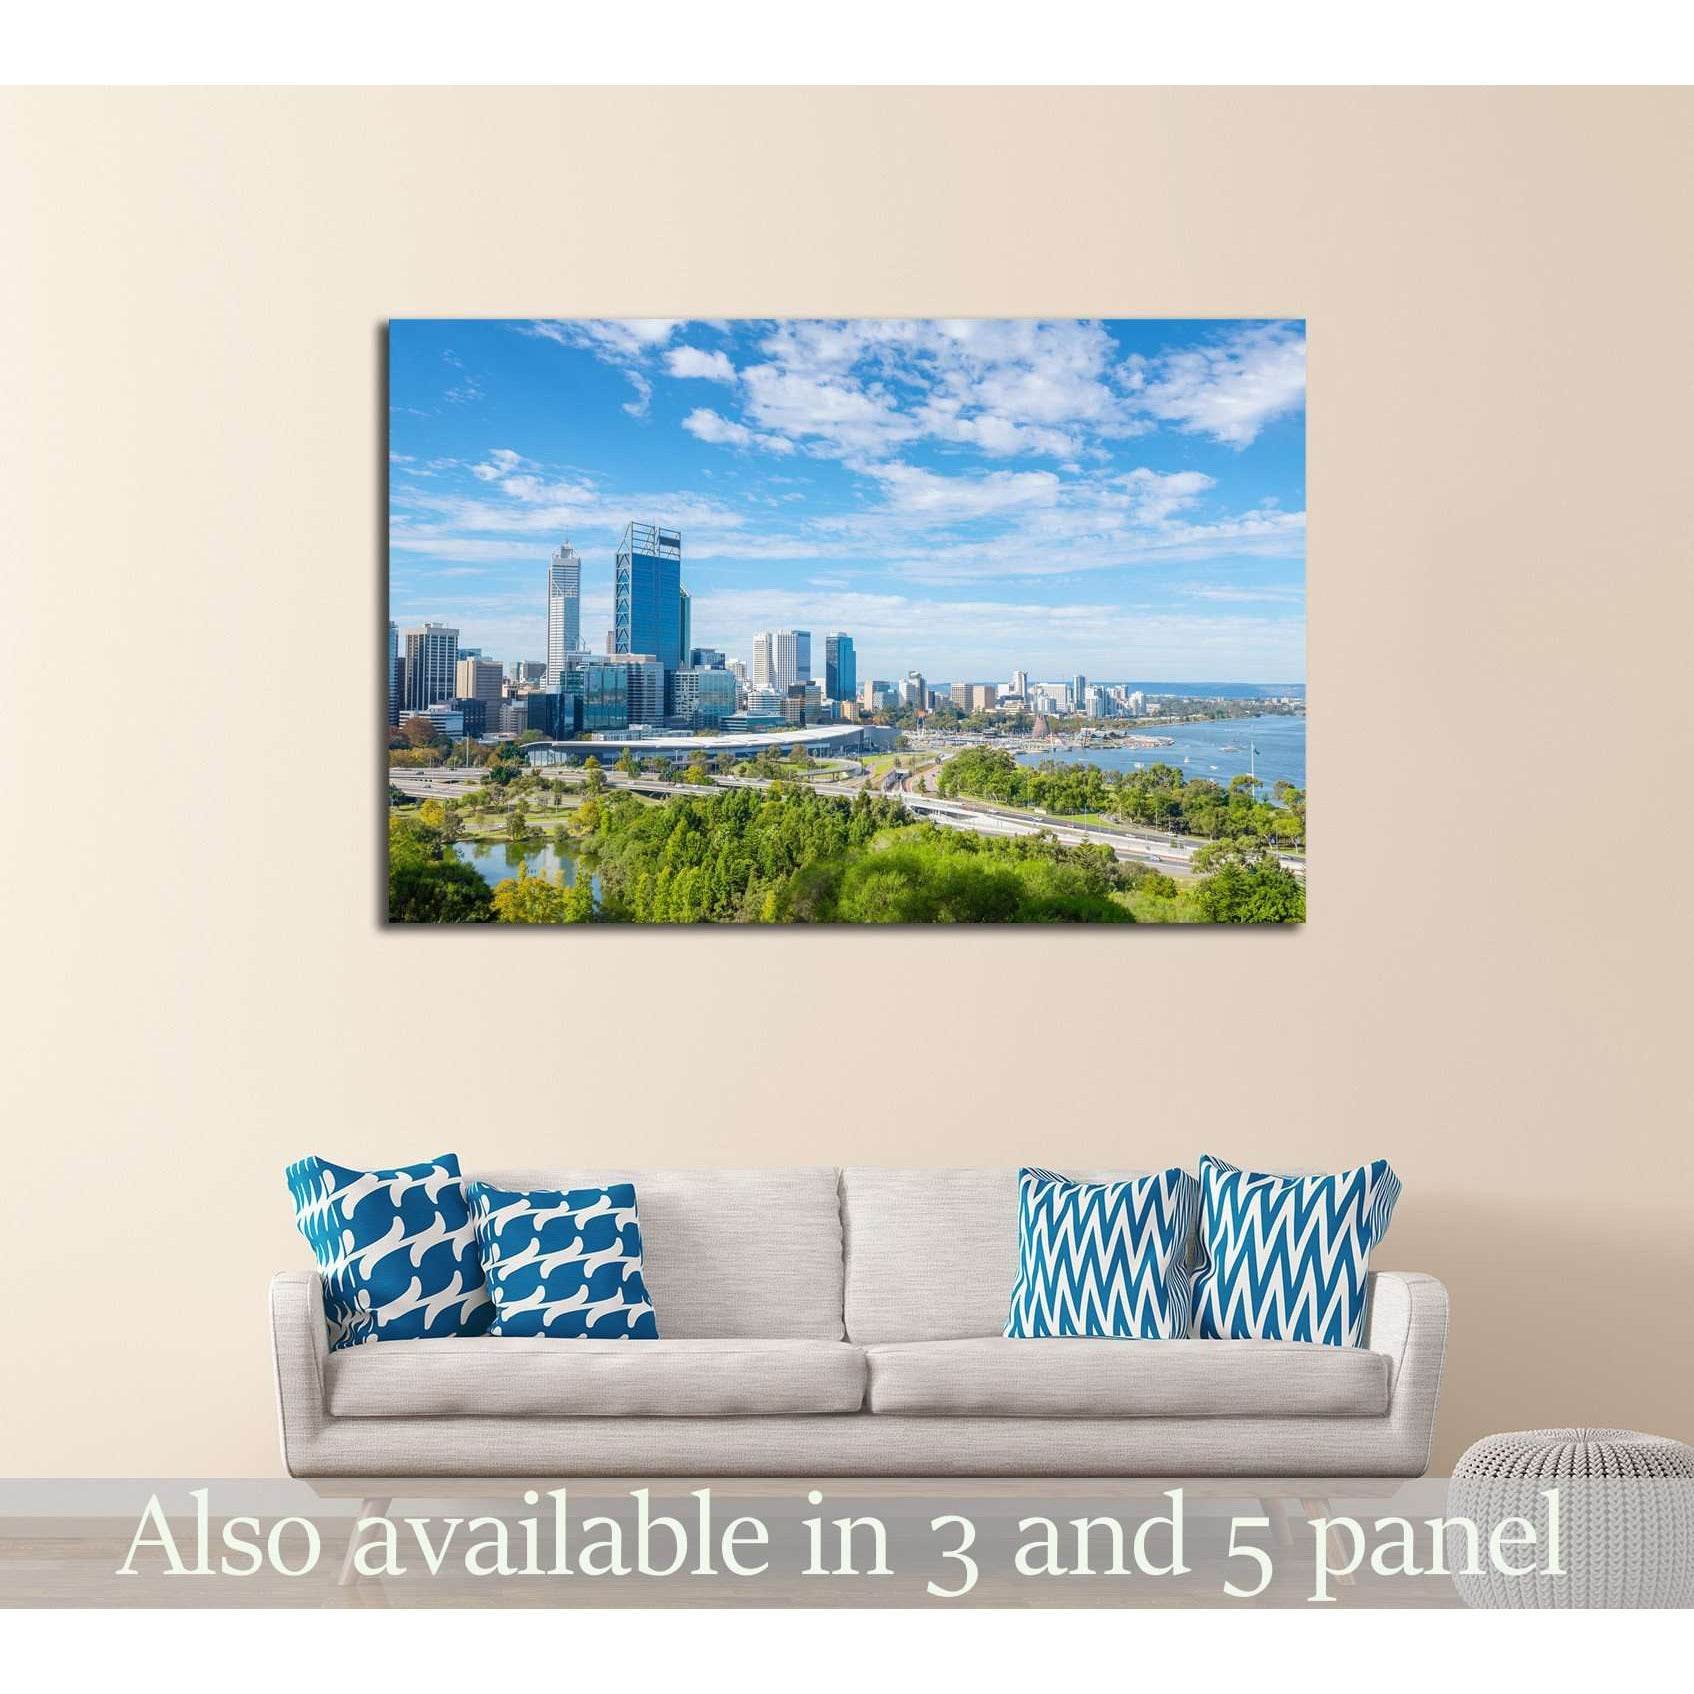 skyline of Perth with city central business district at the noon №2312 Ready to Hang Canvas Print